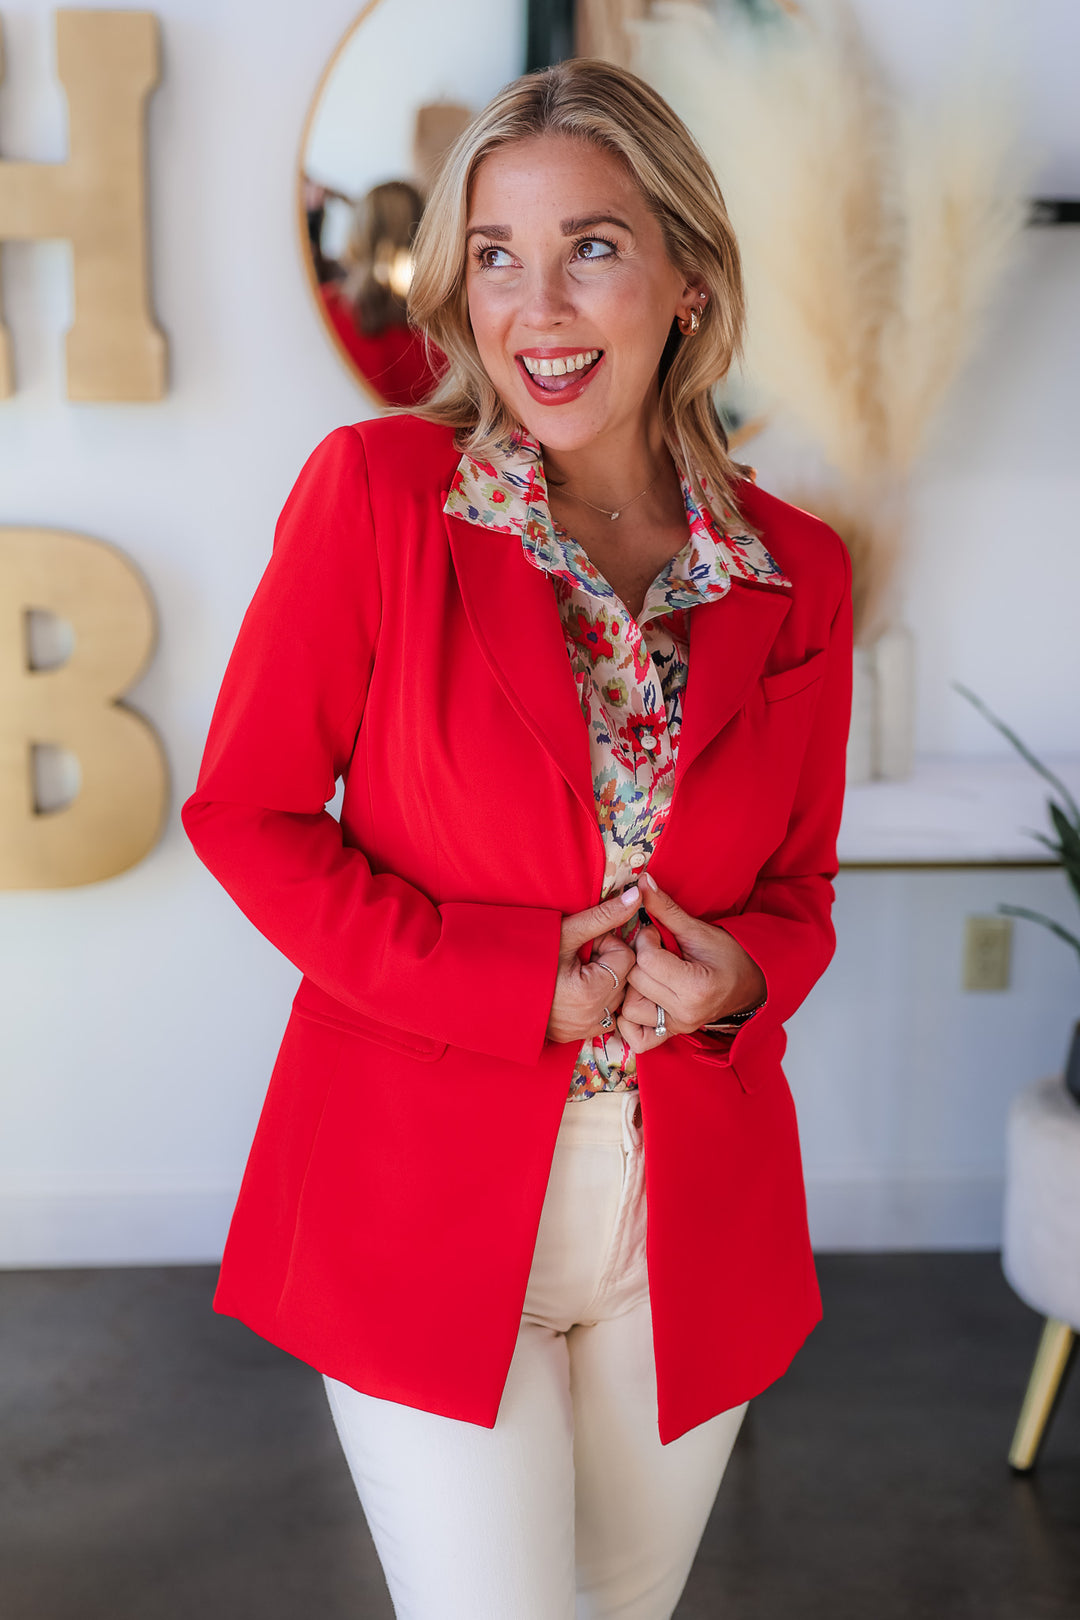 A blonde woman standing in a shop wearing a printed blouse, red blazer and ivory colored blue jeans.